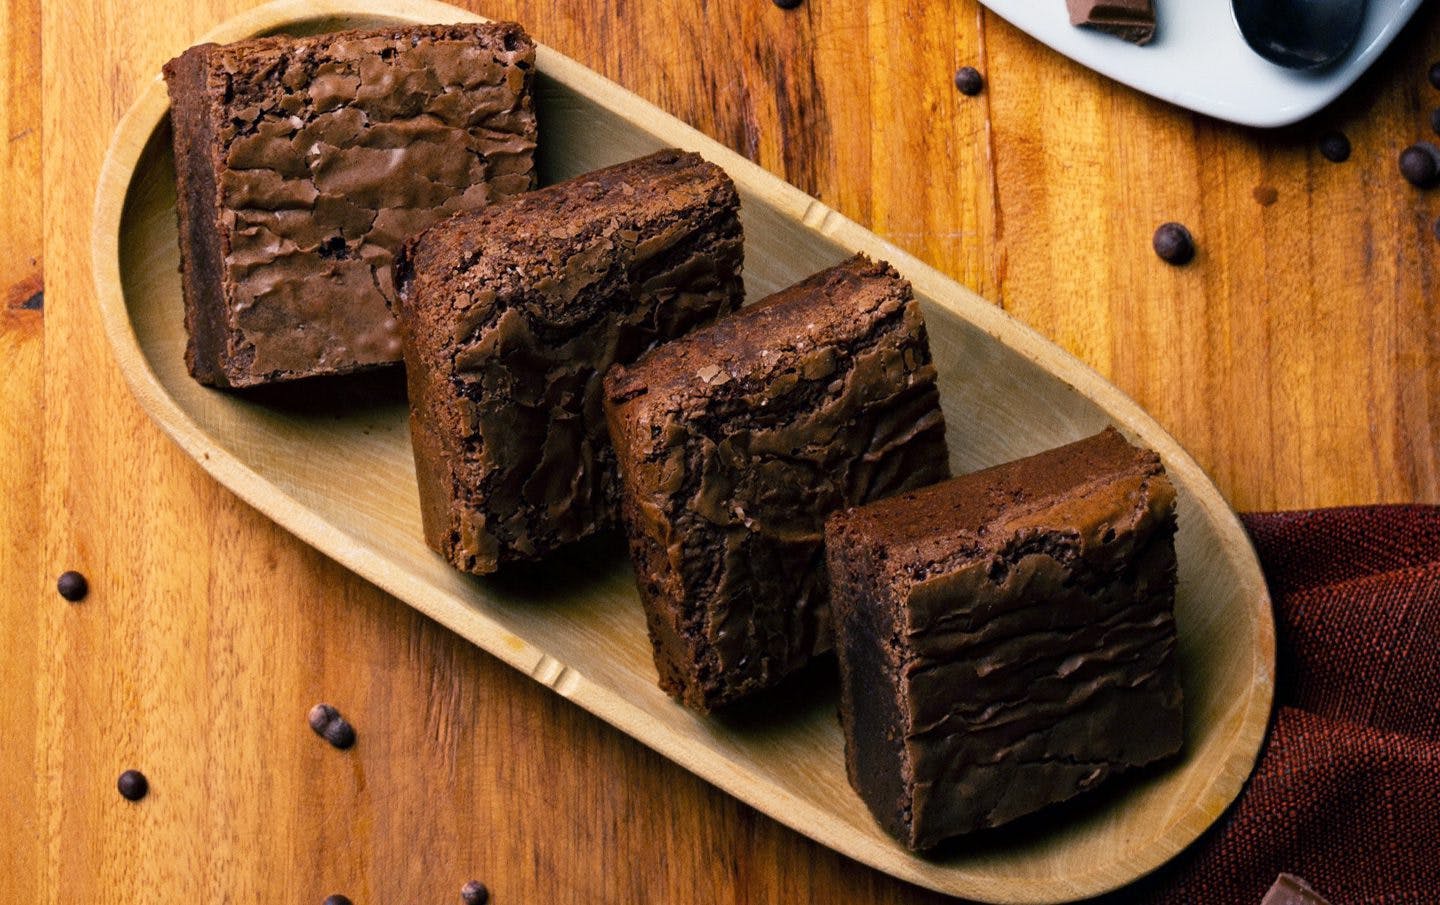 four brownies arranged inside a wooden oblong plate in wooden table